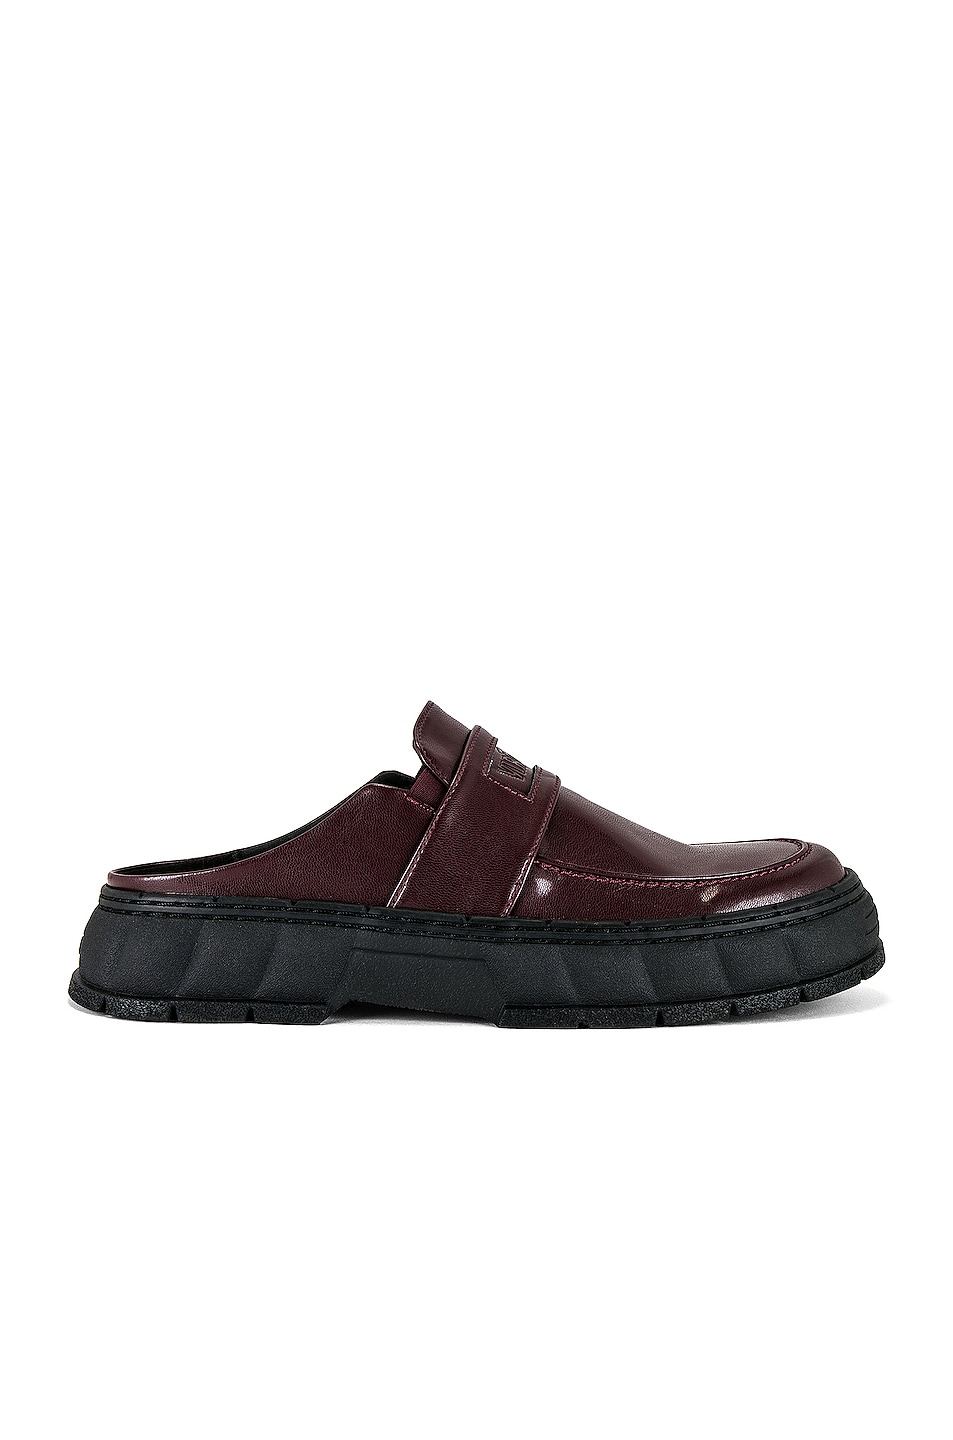 Image 1 of Viron Loafer in Burgundy